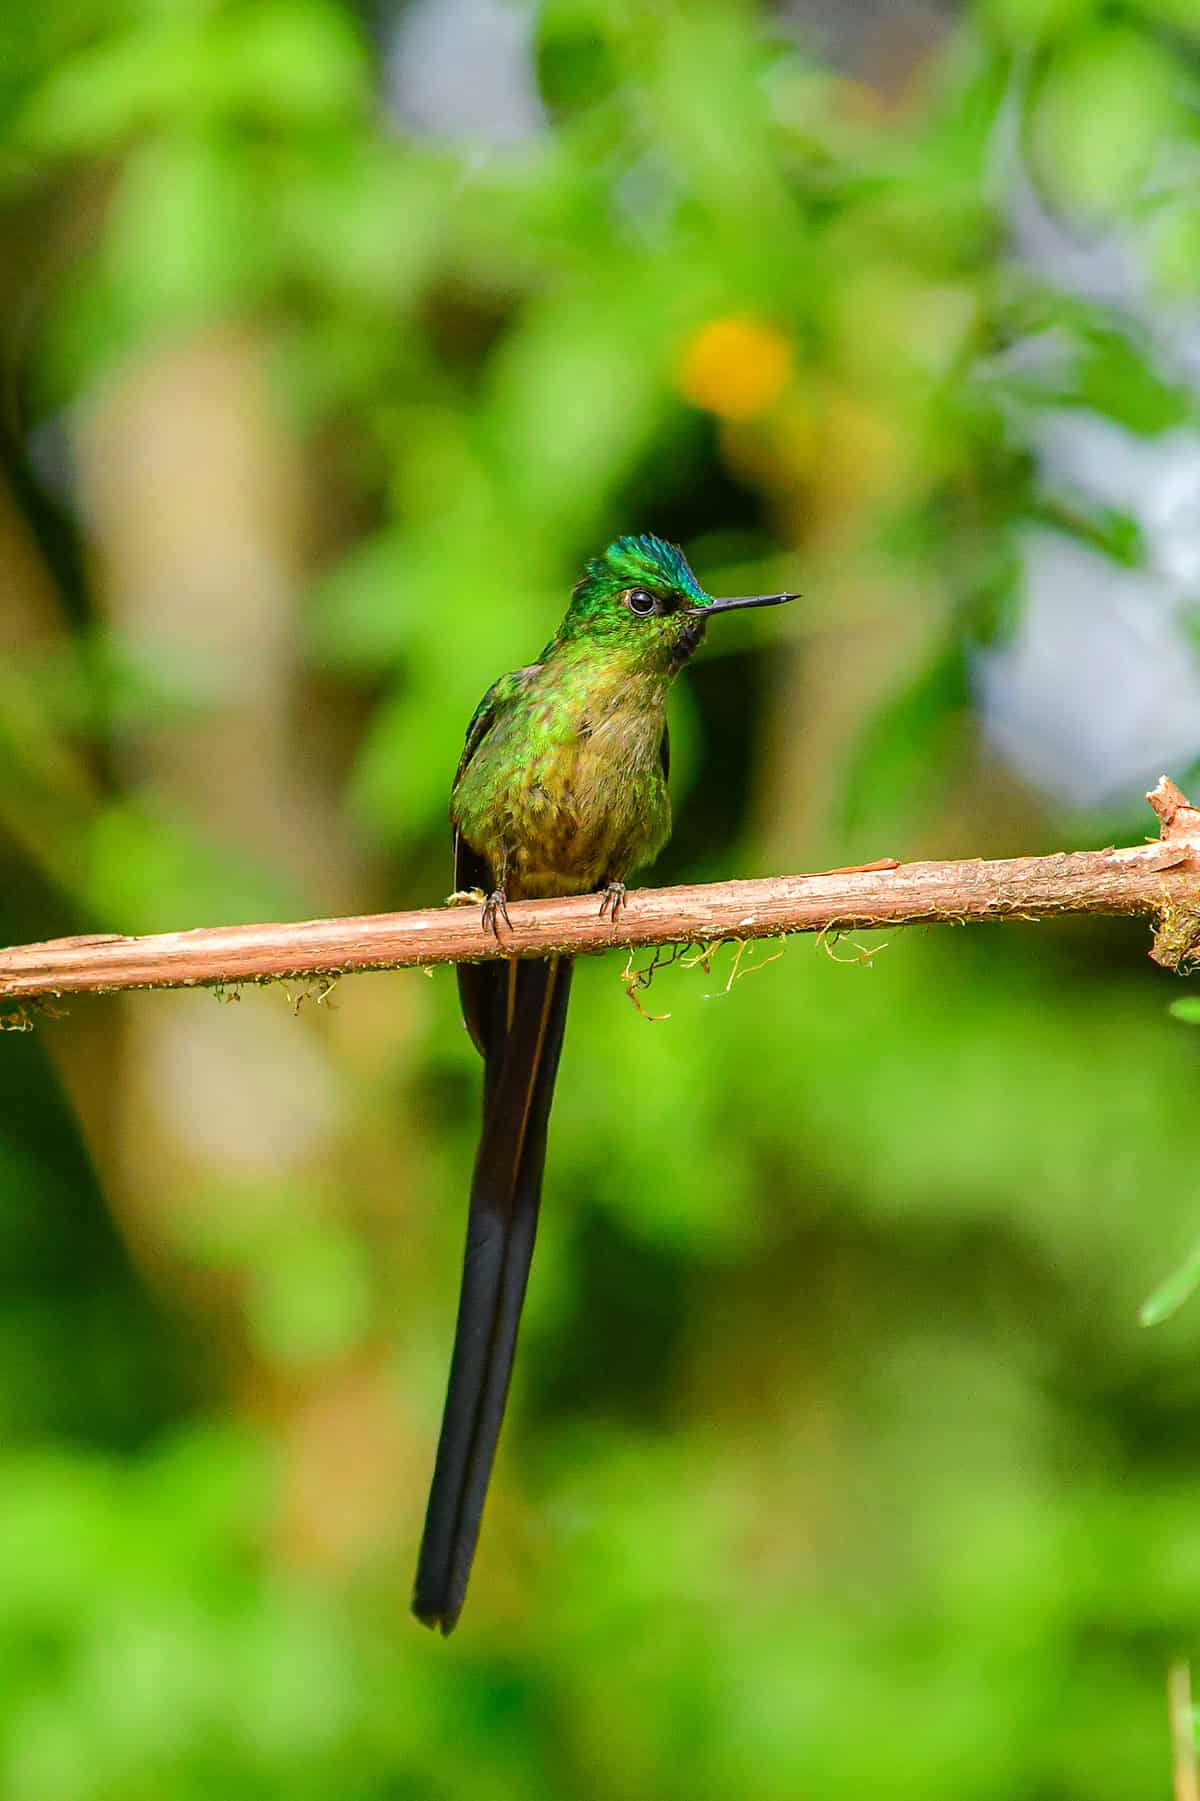 Choosing the Right Plants To Attract Hummingbirds